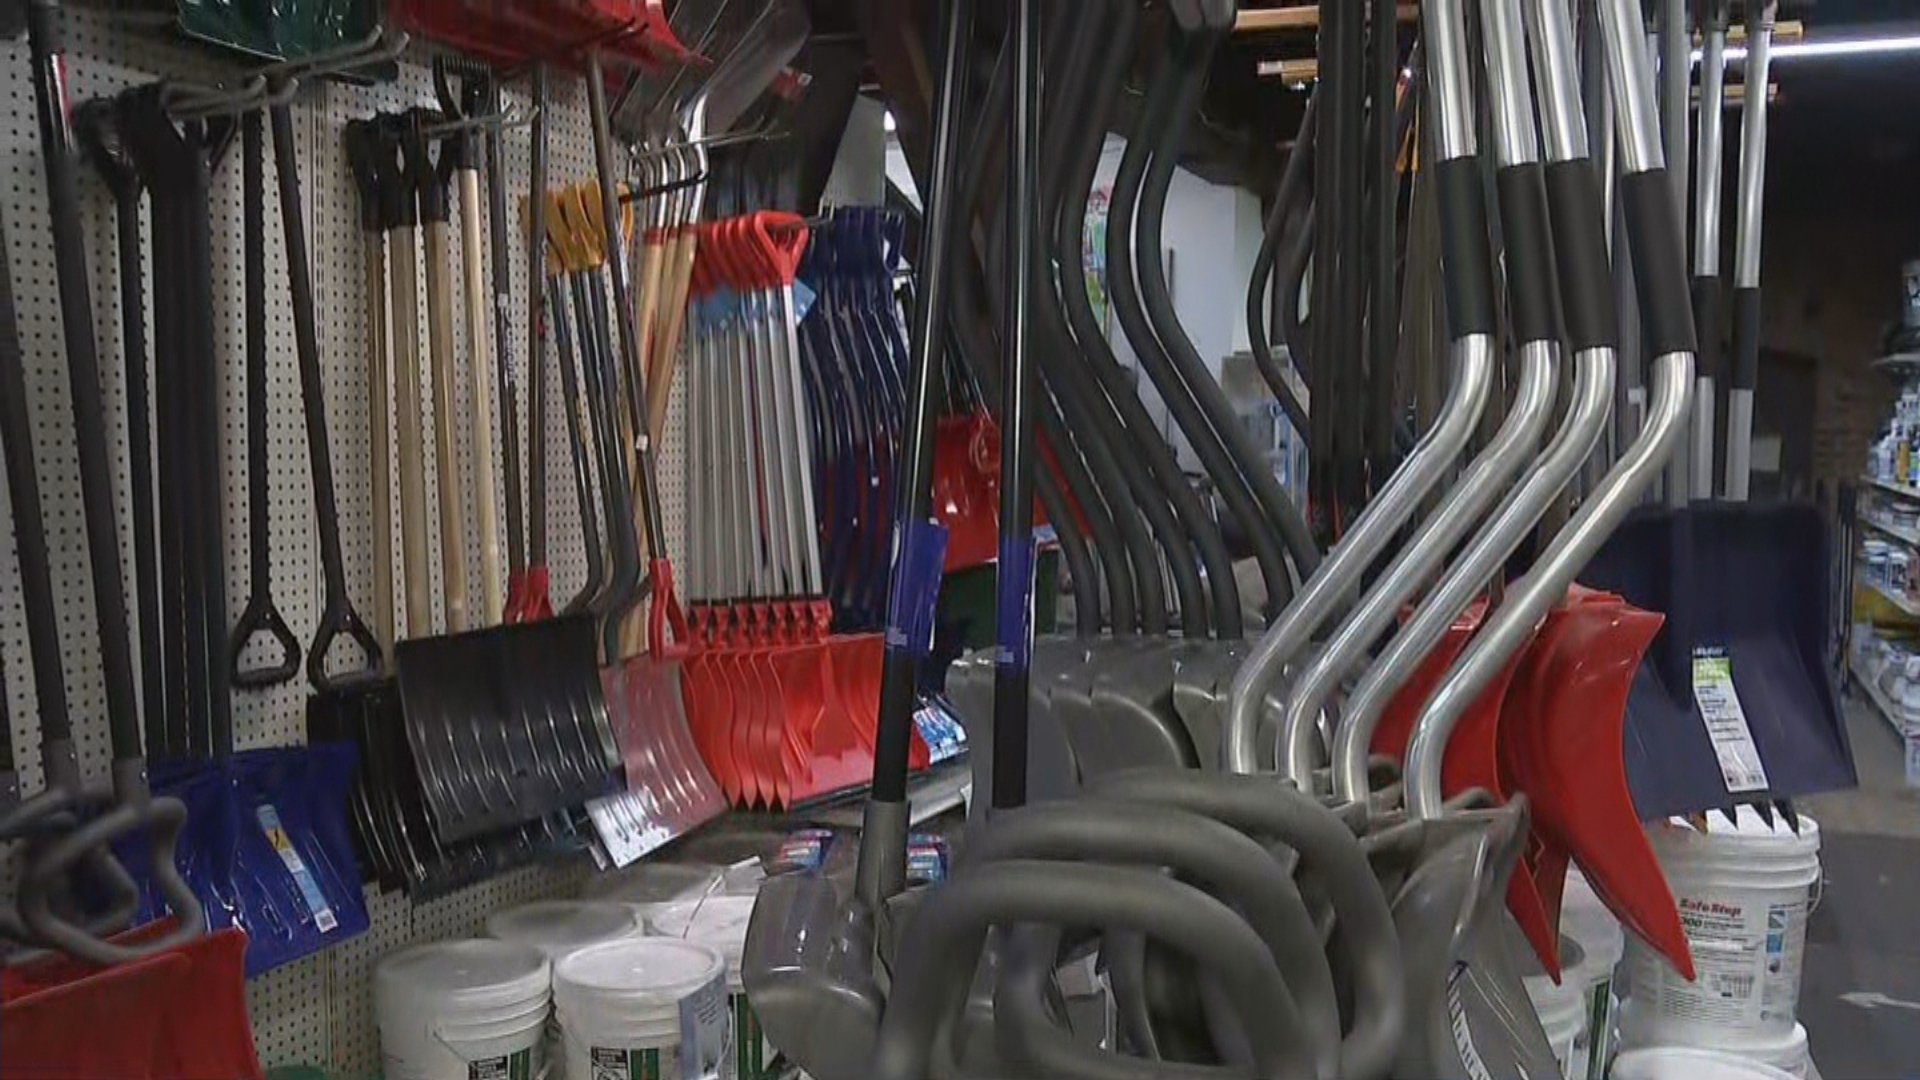 Some Philadelphia Area Hardware Stores Overstocked With Winter Storm Products Due To Supply Chain Shortage: 'It'd Be Nice To Move Some Of This Inventory Out'